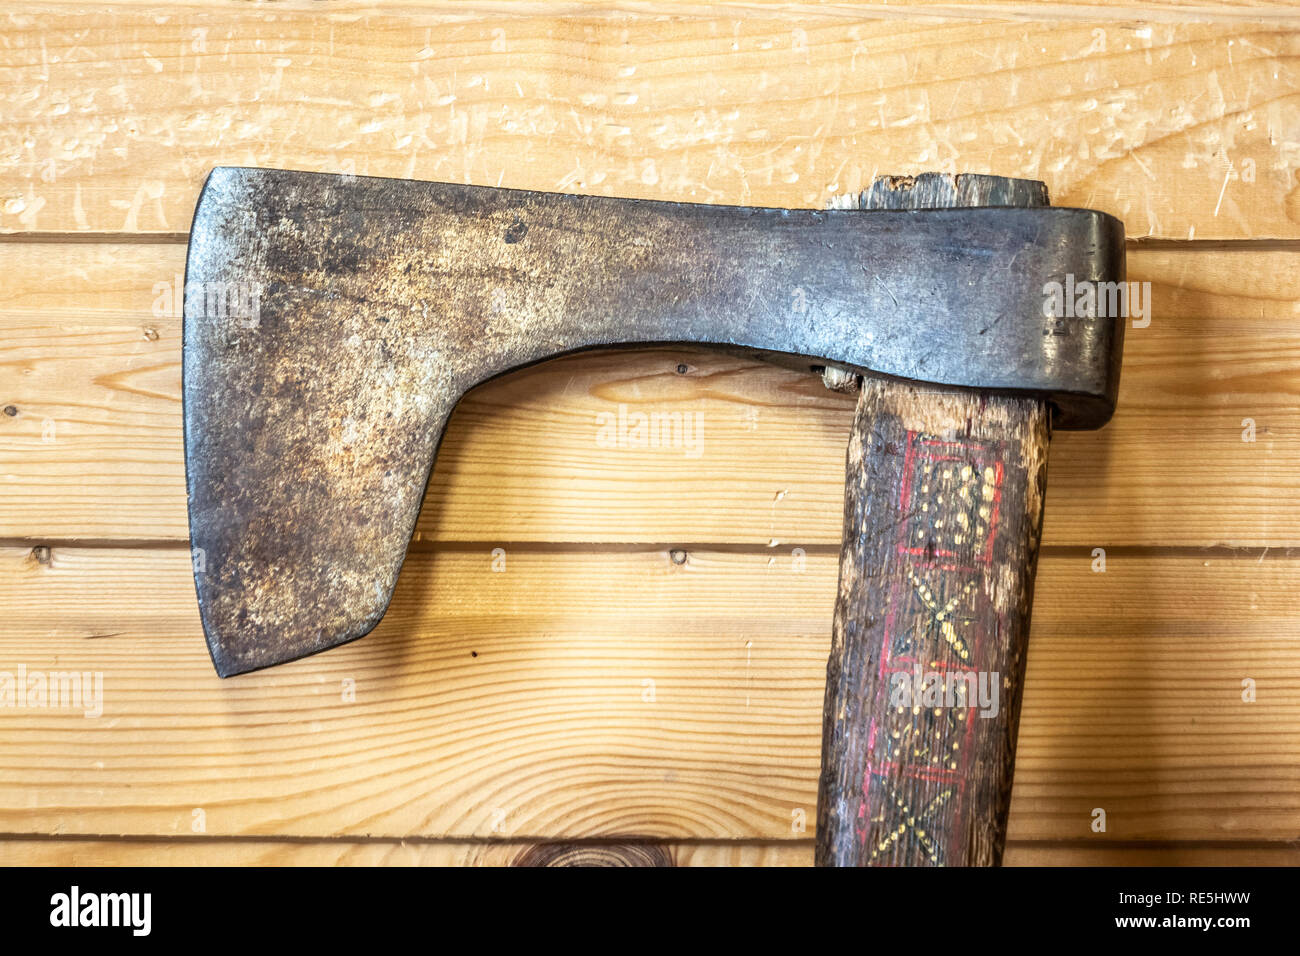 Old Russian Axe Stock Photos & Old Russian Axe Stock Images - Alamy